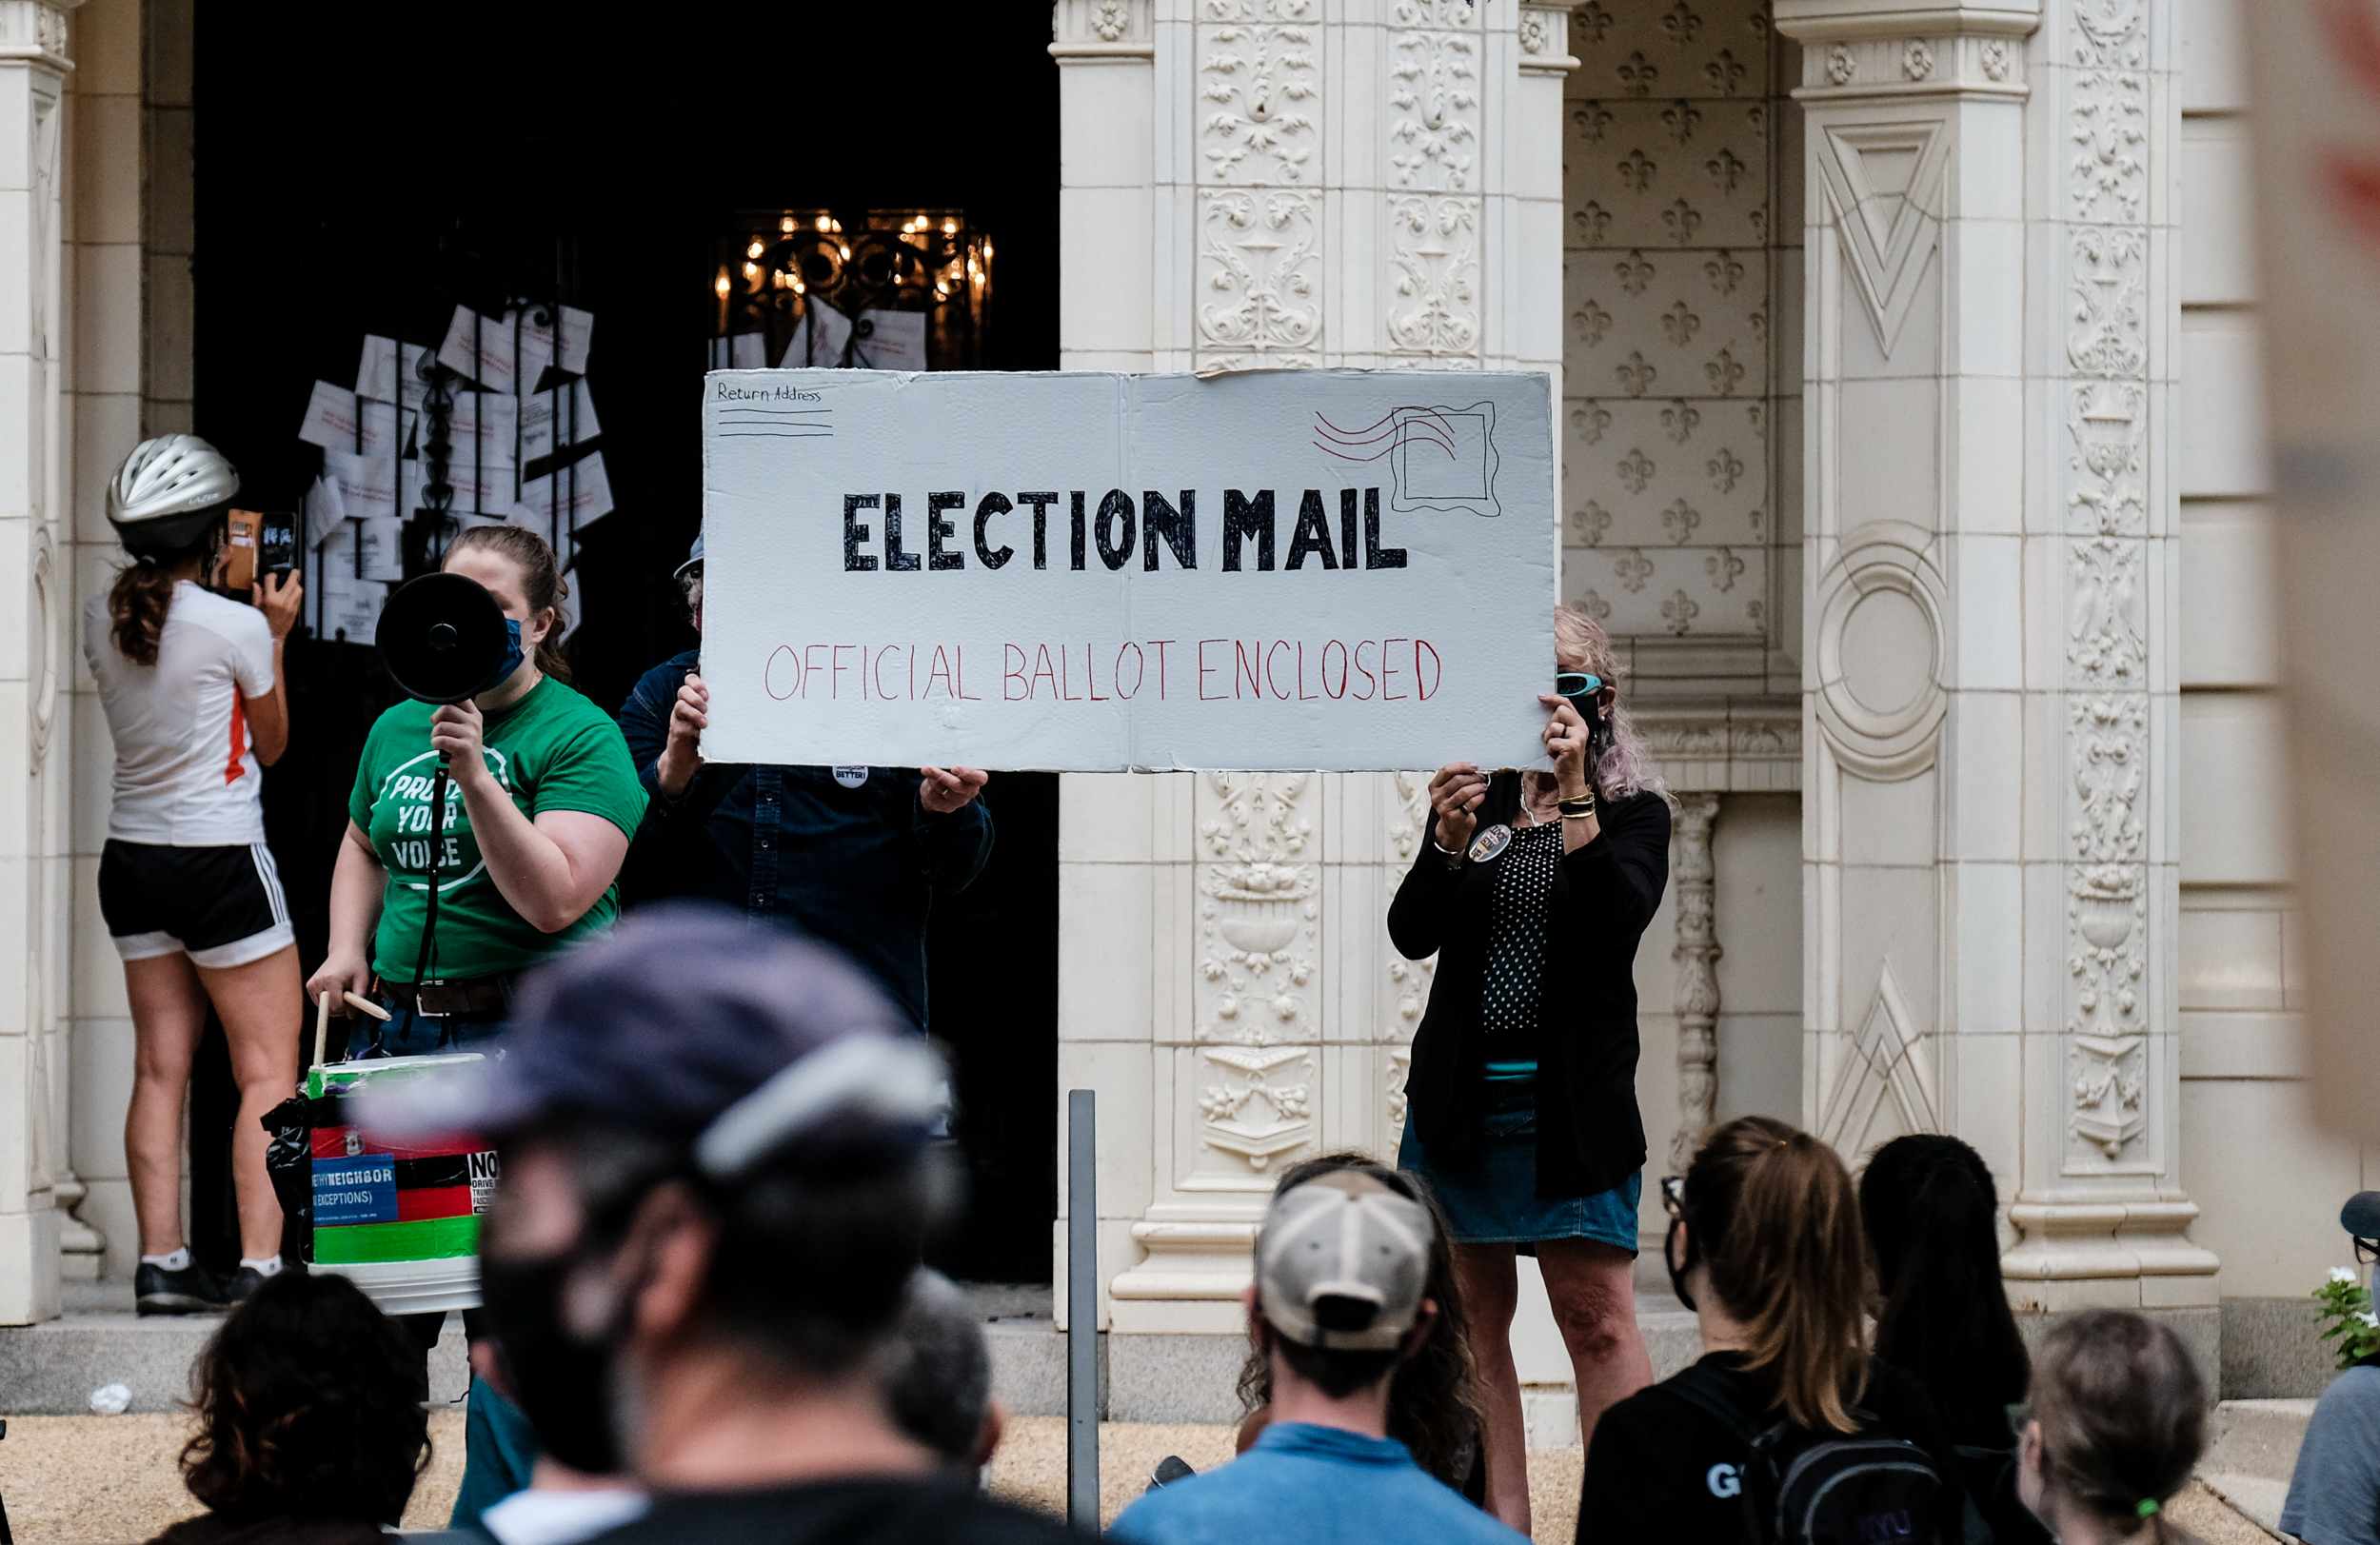 WASHINGTON, DC - AUGUST 15: Demonstrators gather outside of the condo of President Donald Trump donor and current U.S. Postmaster General Louis Dejoy on August 15, 2020 in Washington, DC. The protests are in response to a recent statement by President Trump to withhold USPS funding that would ensure that the post office would be unable handle mail-in voting ballots for the upcoming 2020 Election. (Photo by Michael A. McCoy/Getty Images)